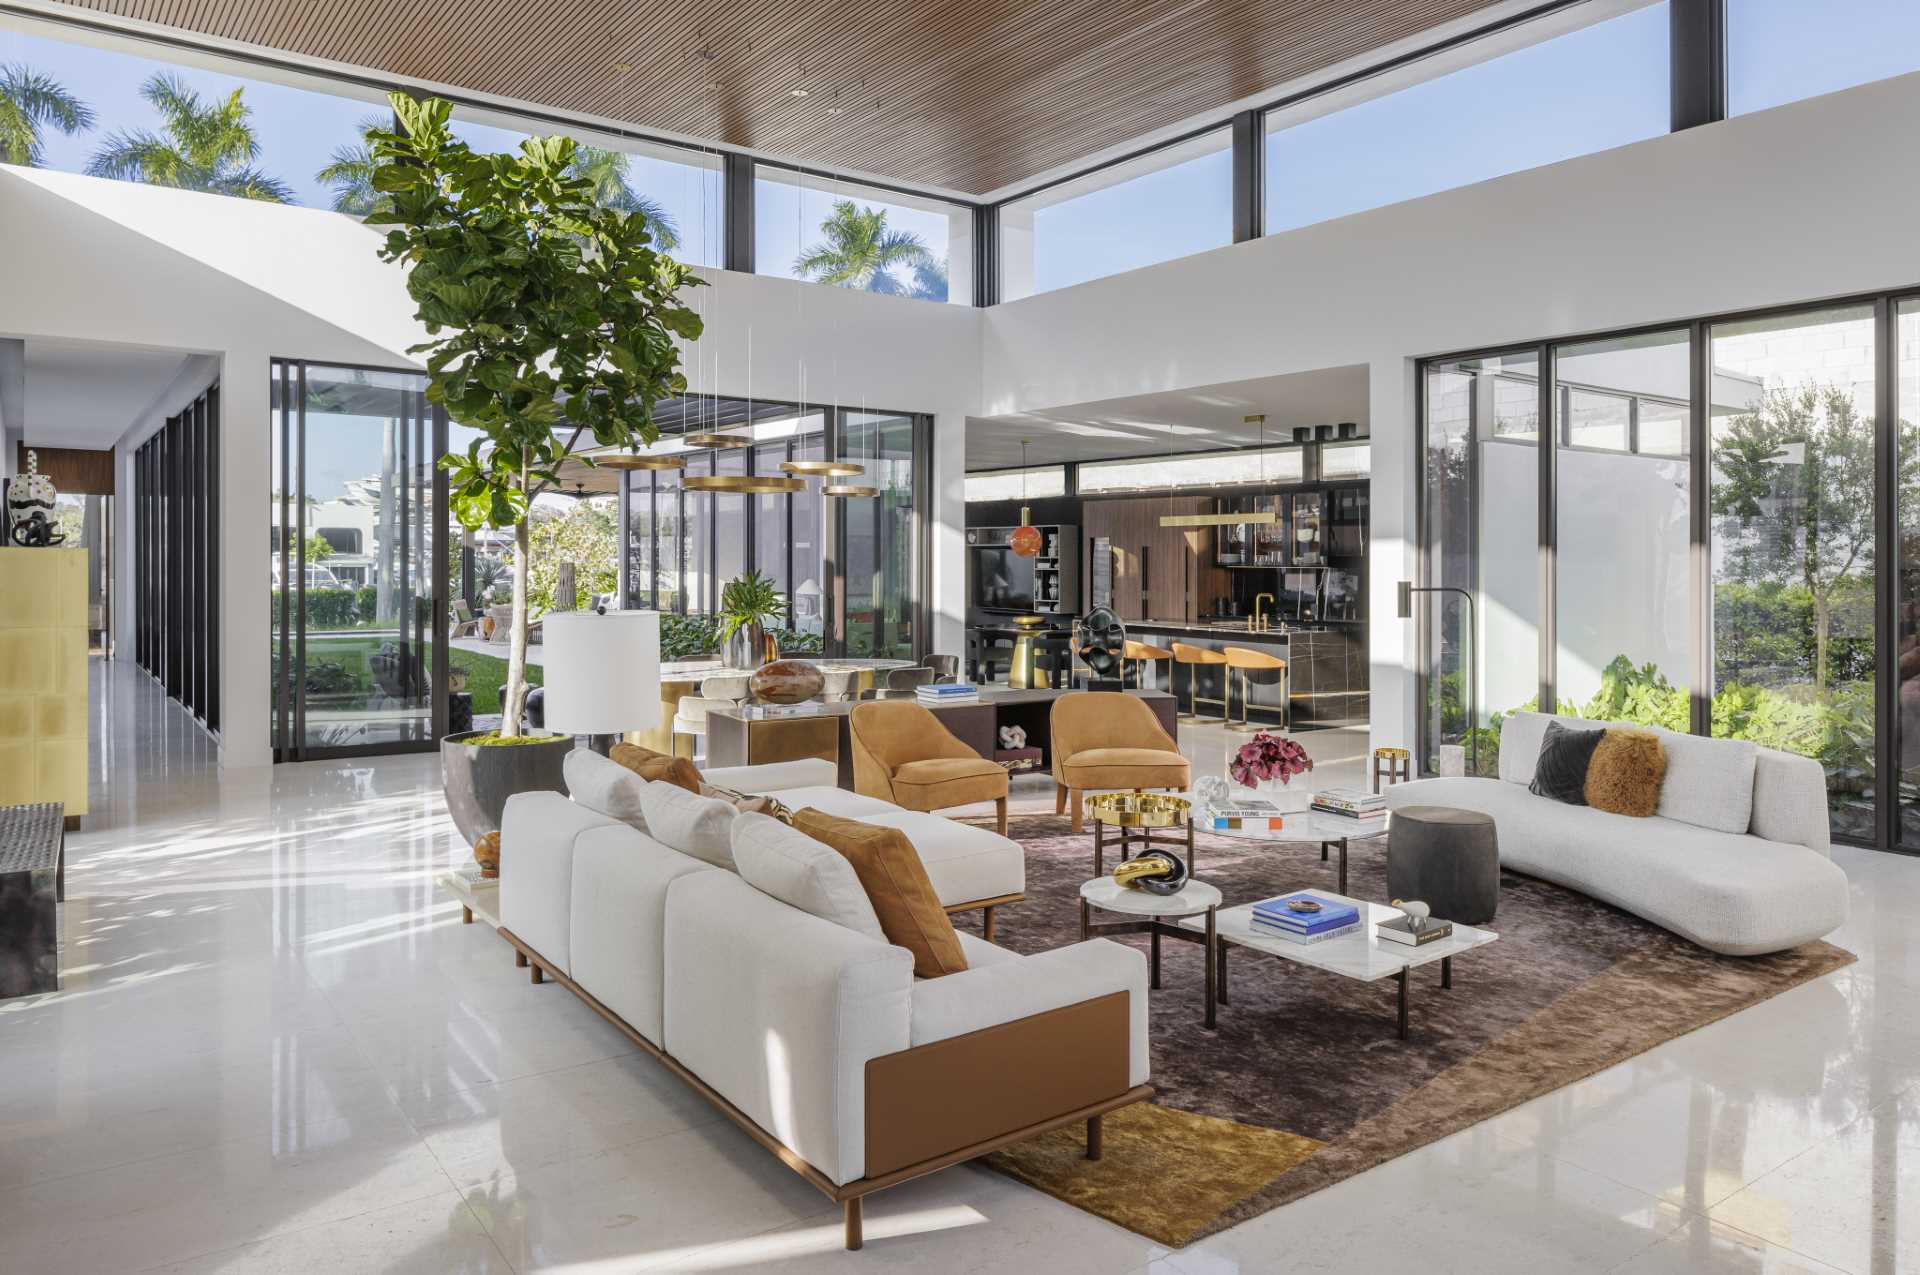 Clerestory Windows Invite The Light Into This Modern Home In Miami ...